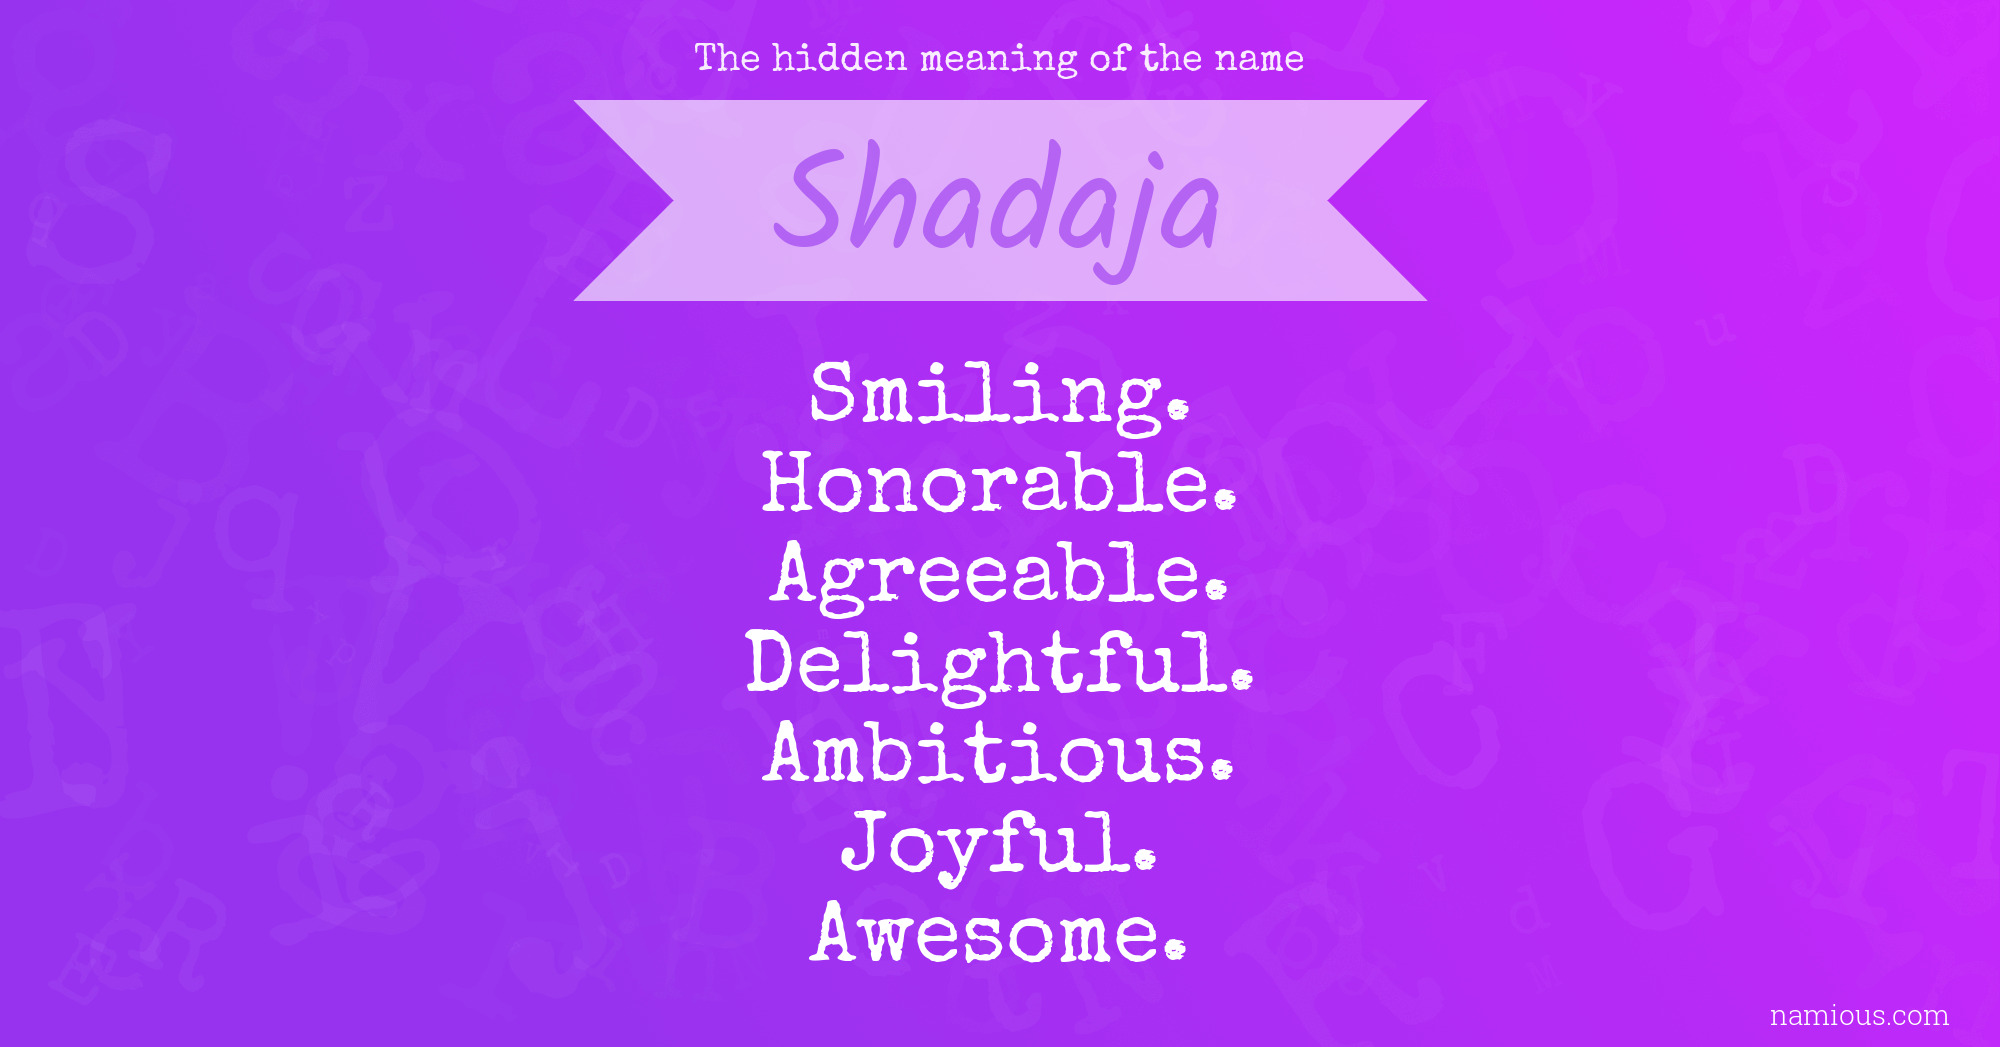 The hidden meaning of the name Shadaja